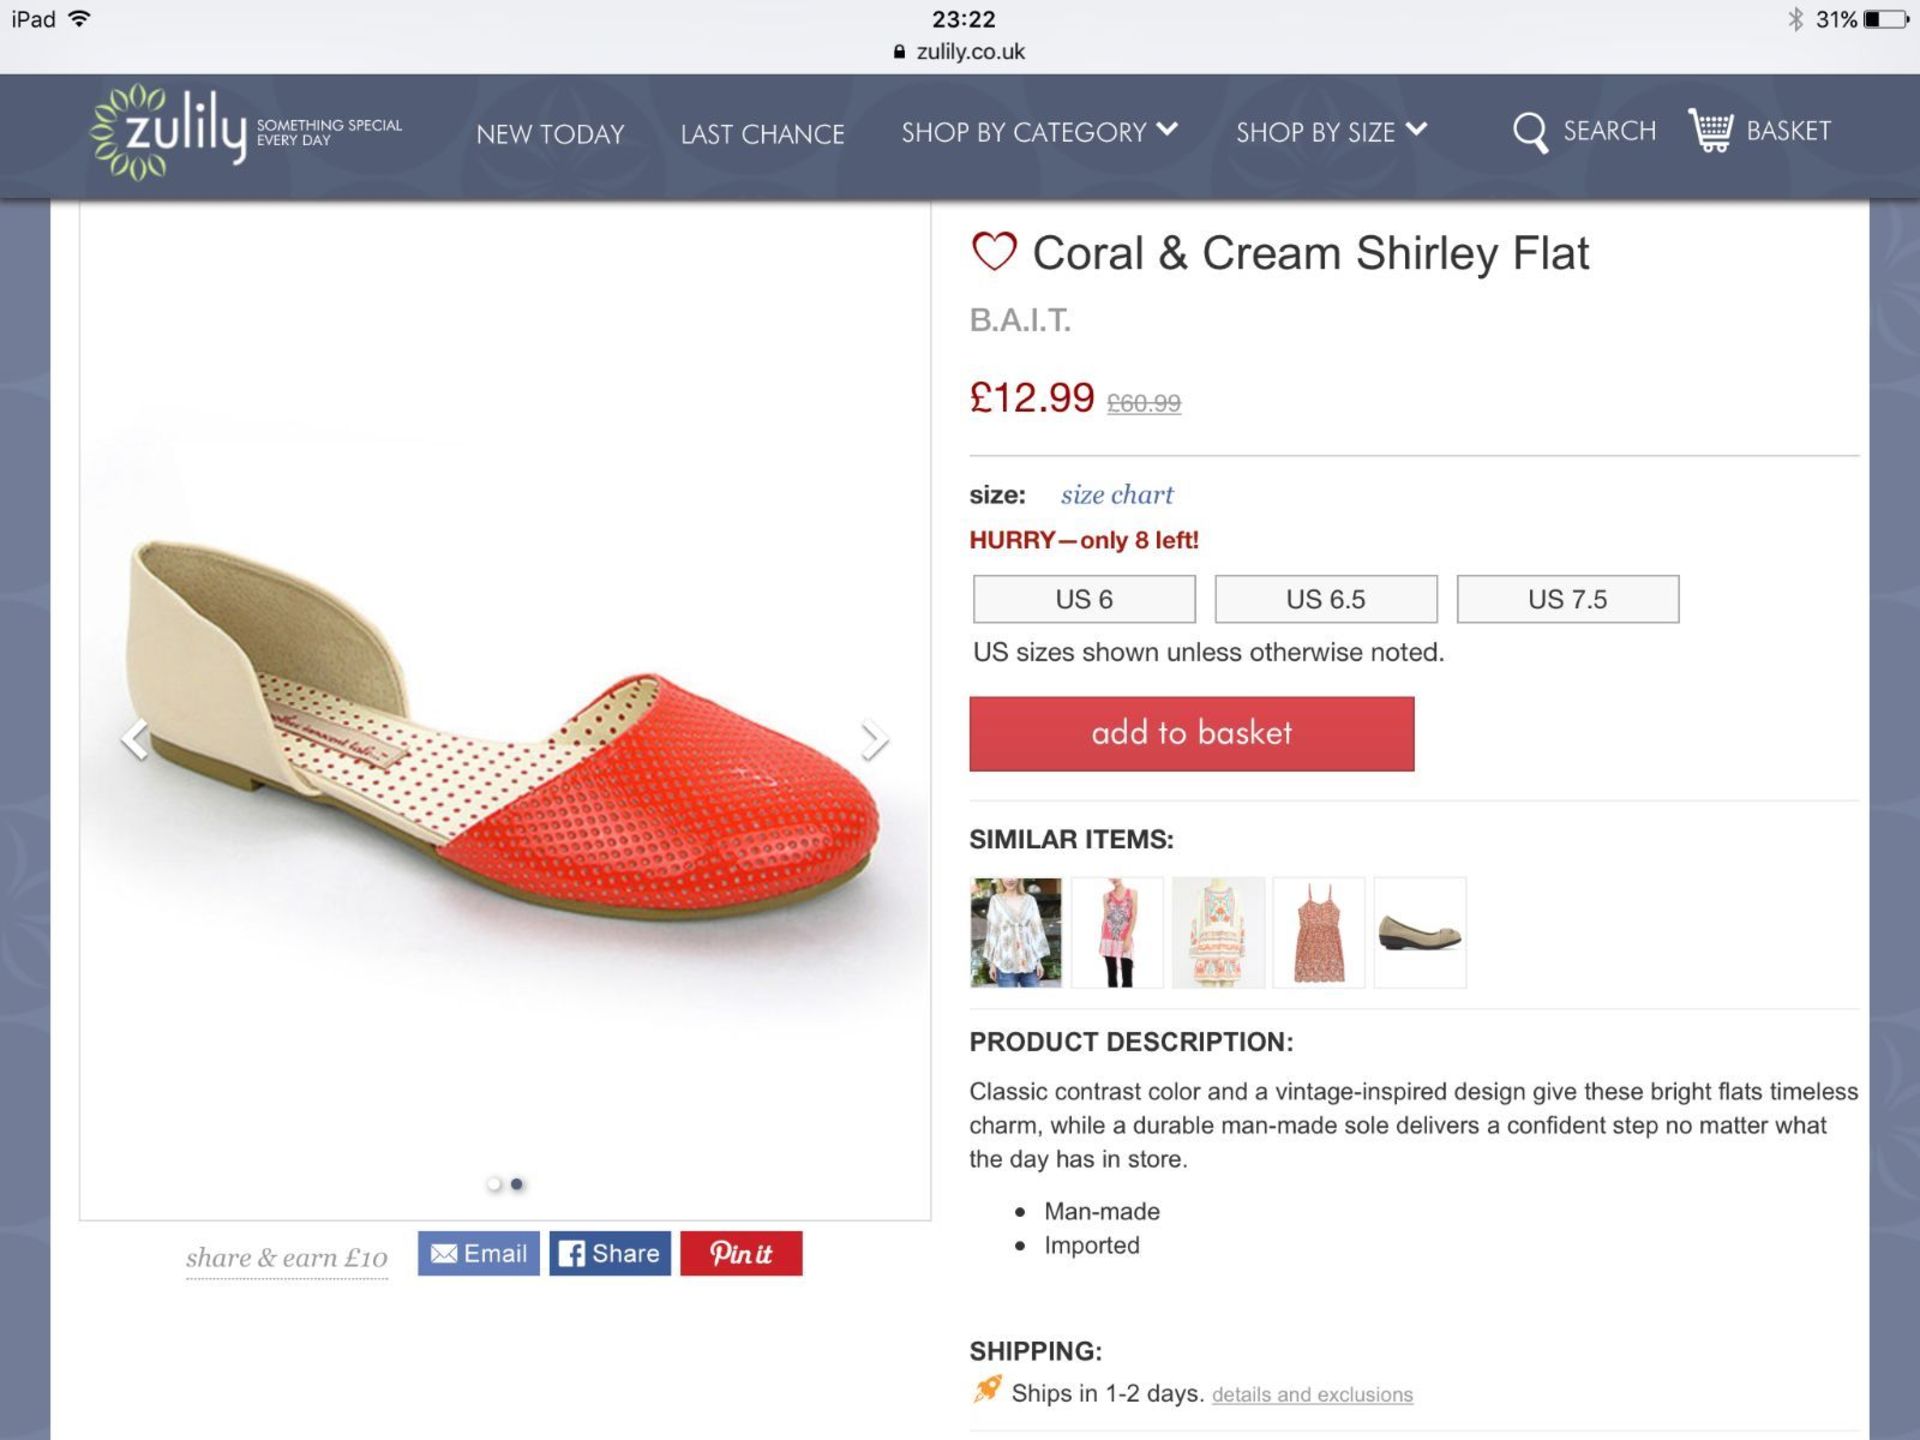 B.A.I.T. Coral & Cream Shirley Flat, Size Eur 38.5, RRP £60.99 (New with box) - Image 3 of 4